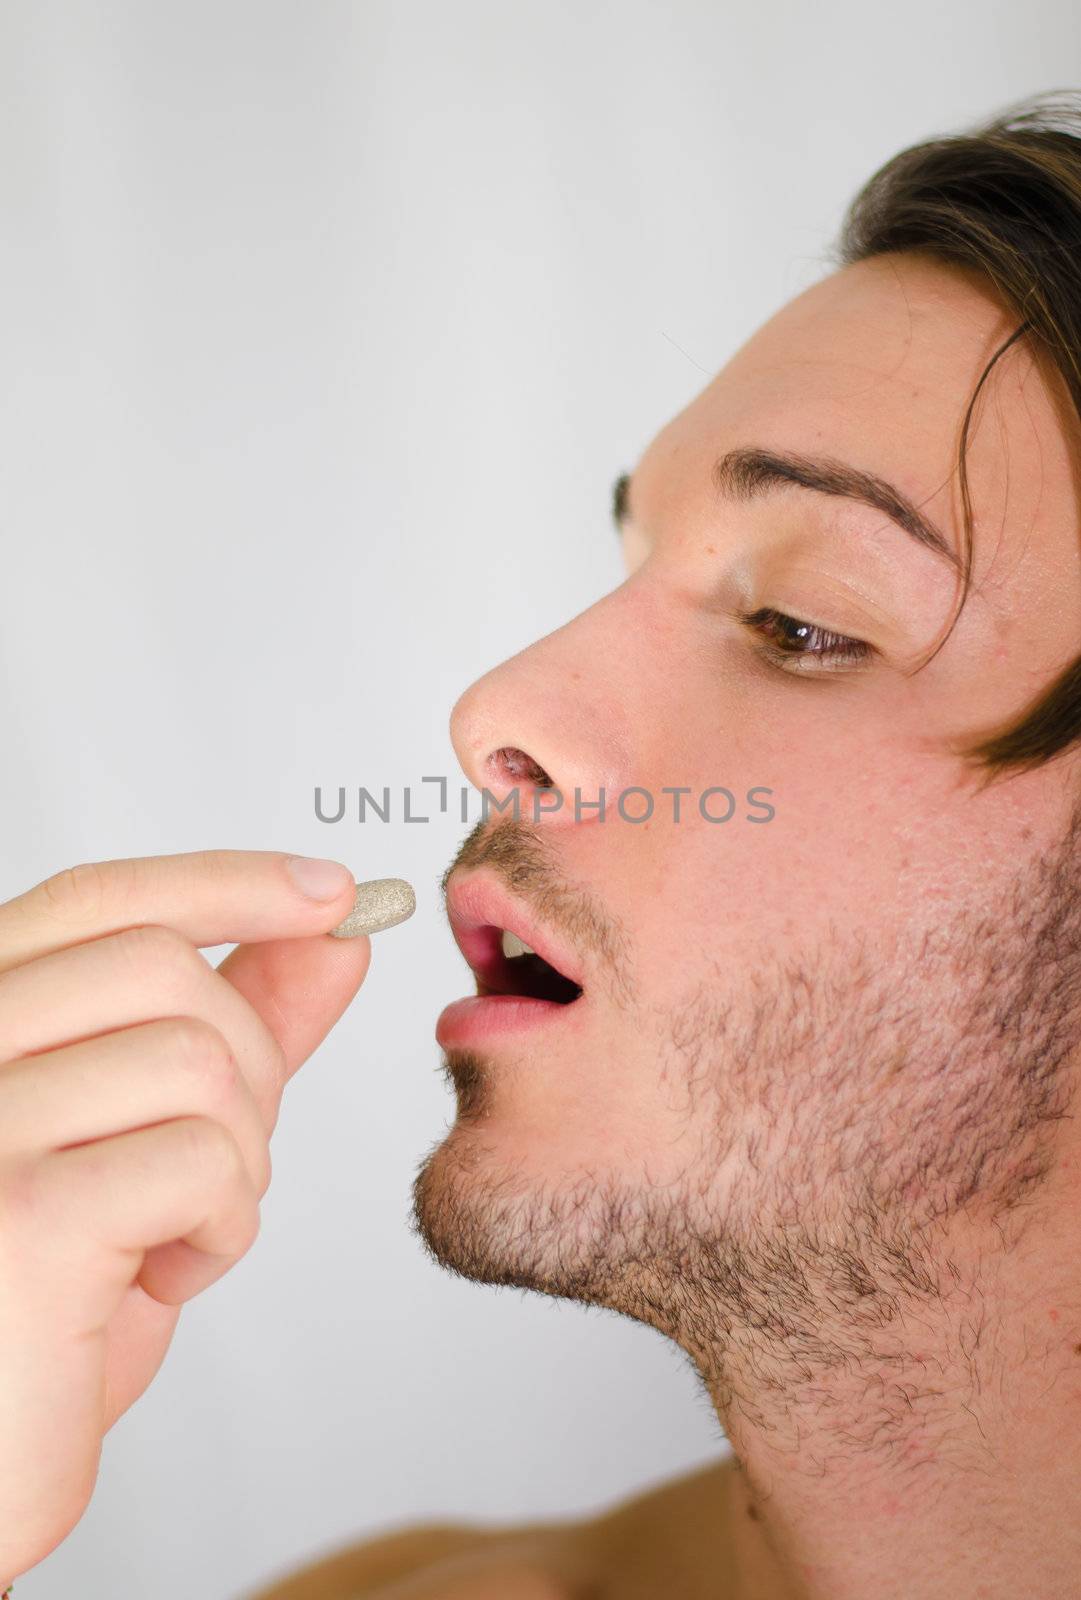 Handsome young man taking pill or medicine capsule by artofphoto